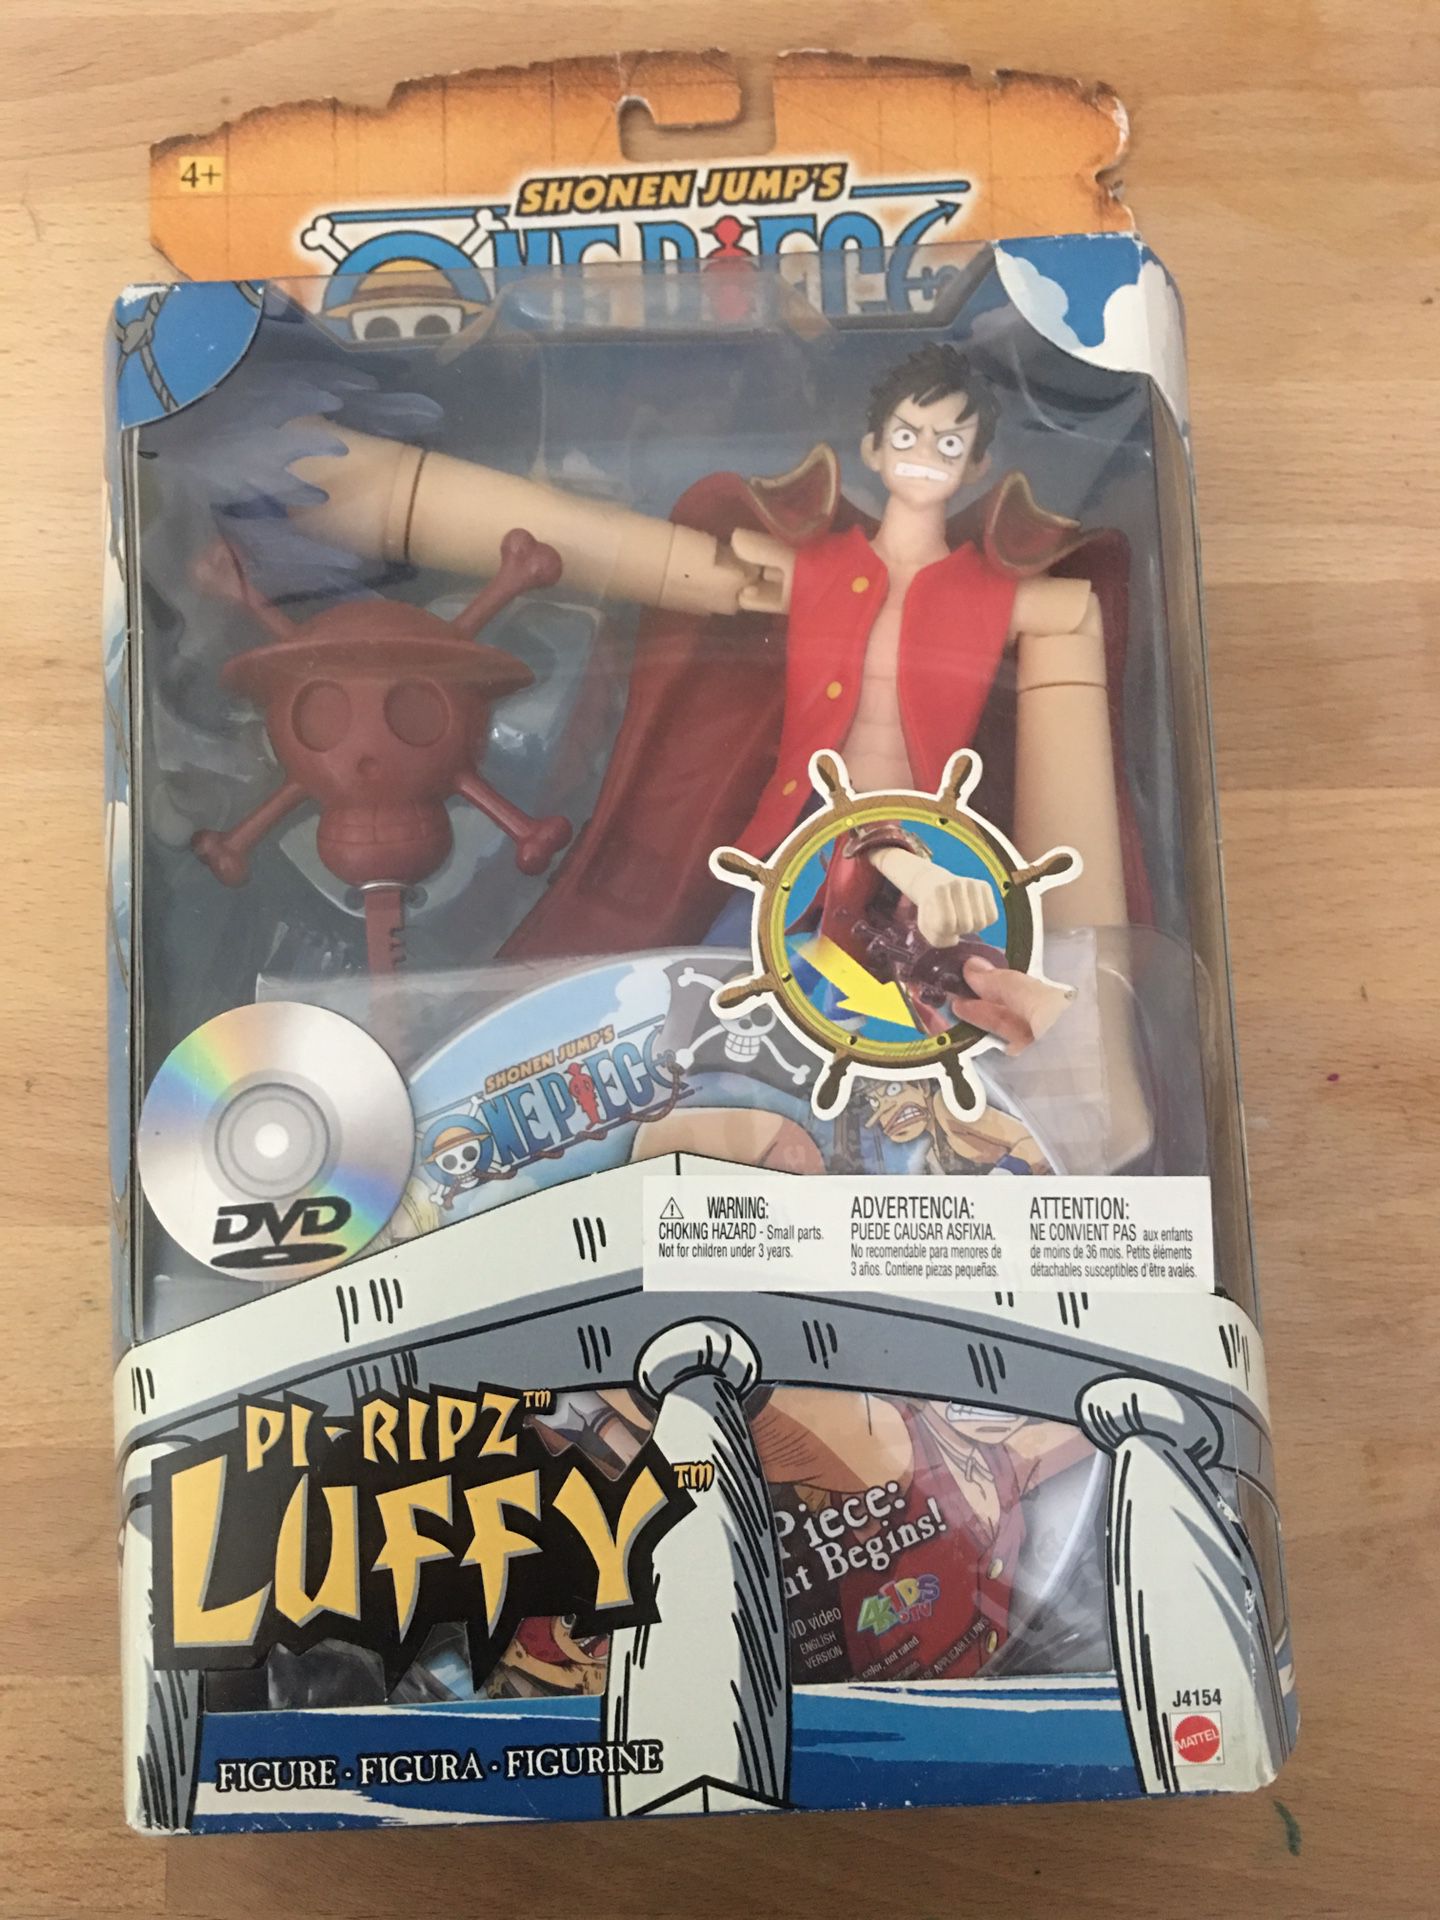 Pi ripz one piece luffy action figure brand new